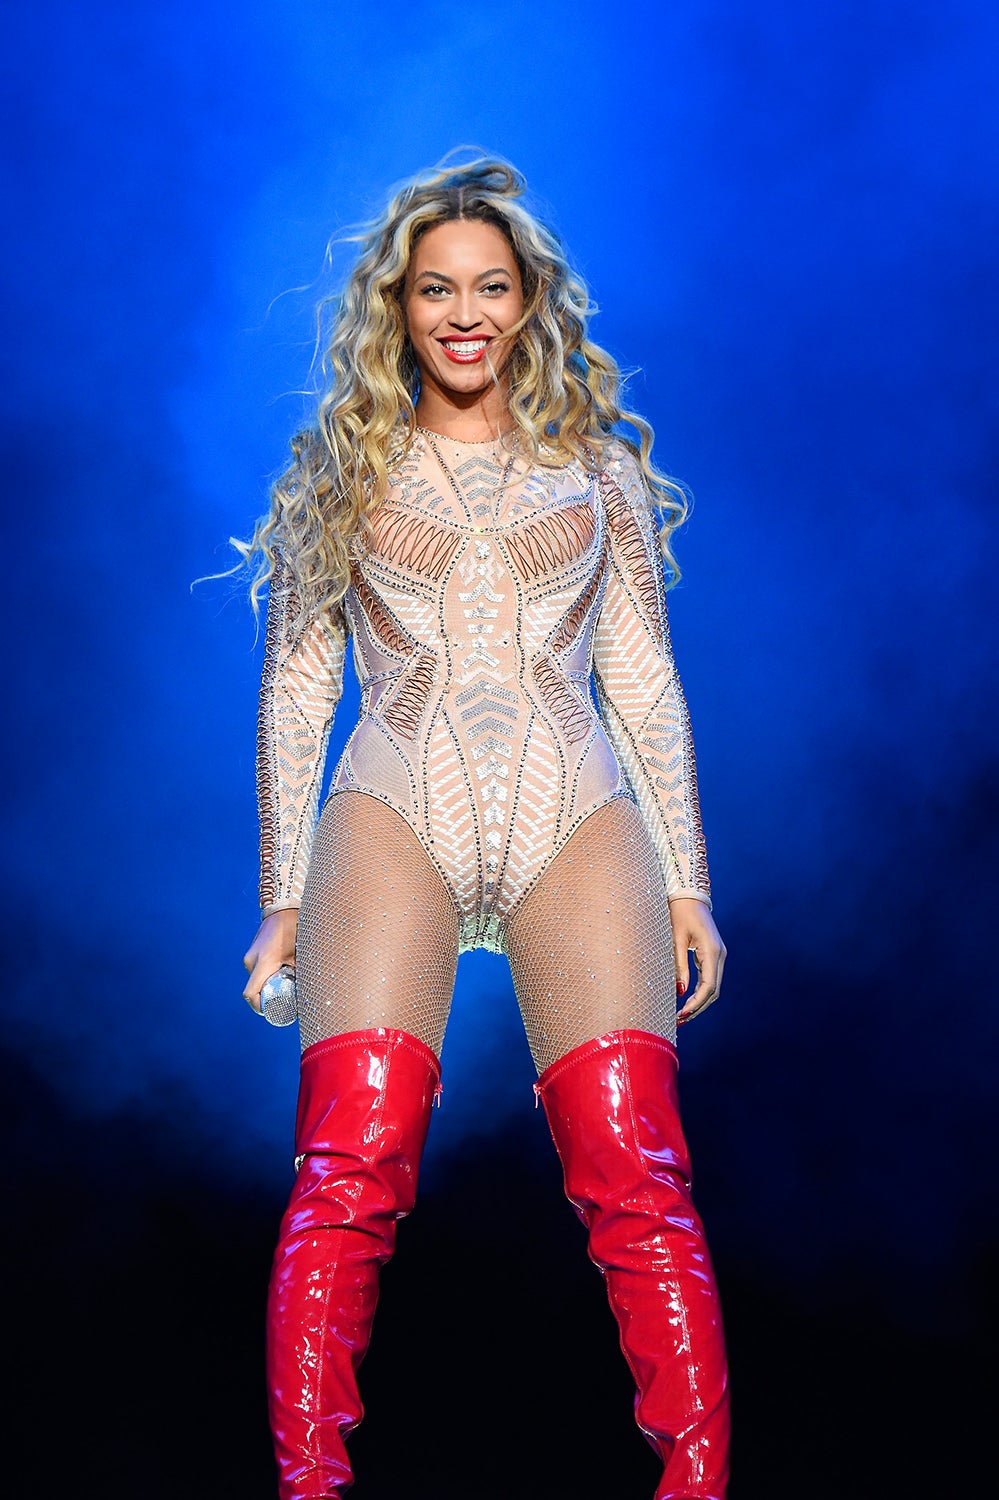 What Does Beyoncé Sing in the Shower? Hint: It's a Gospel Song